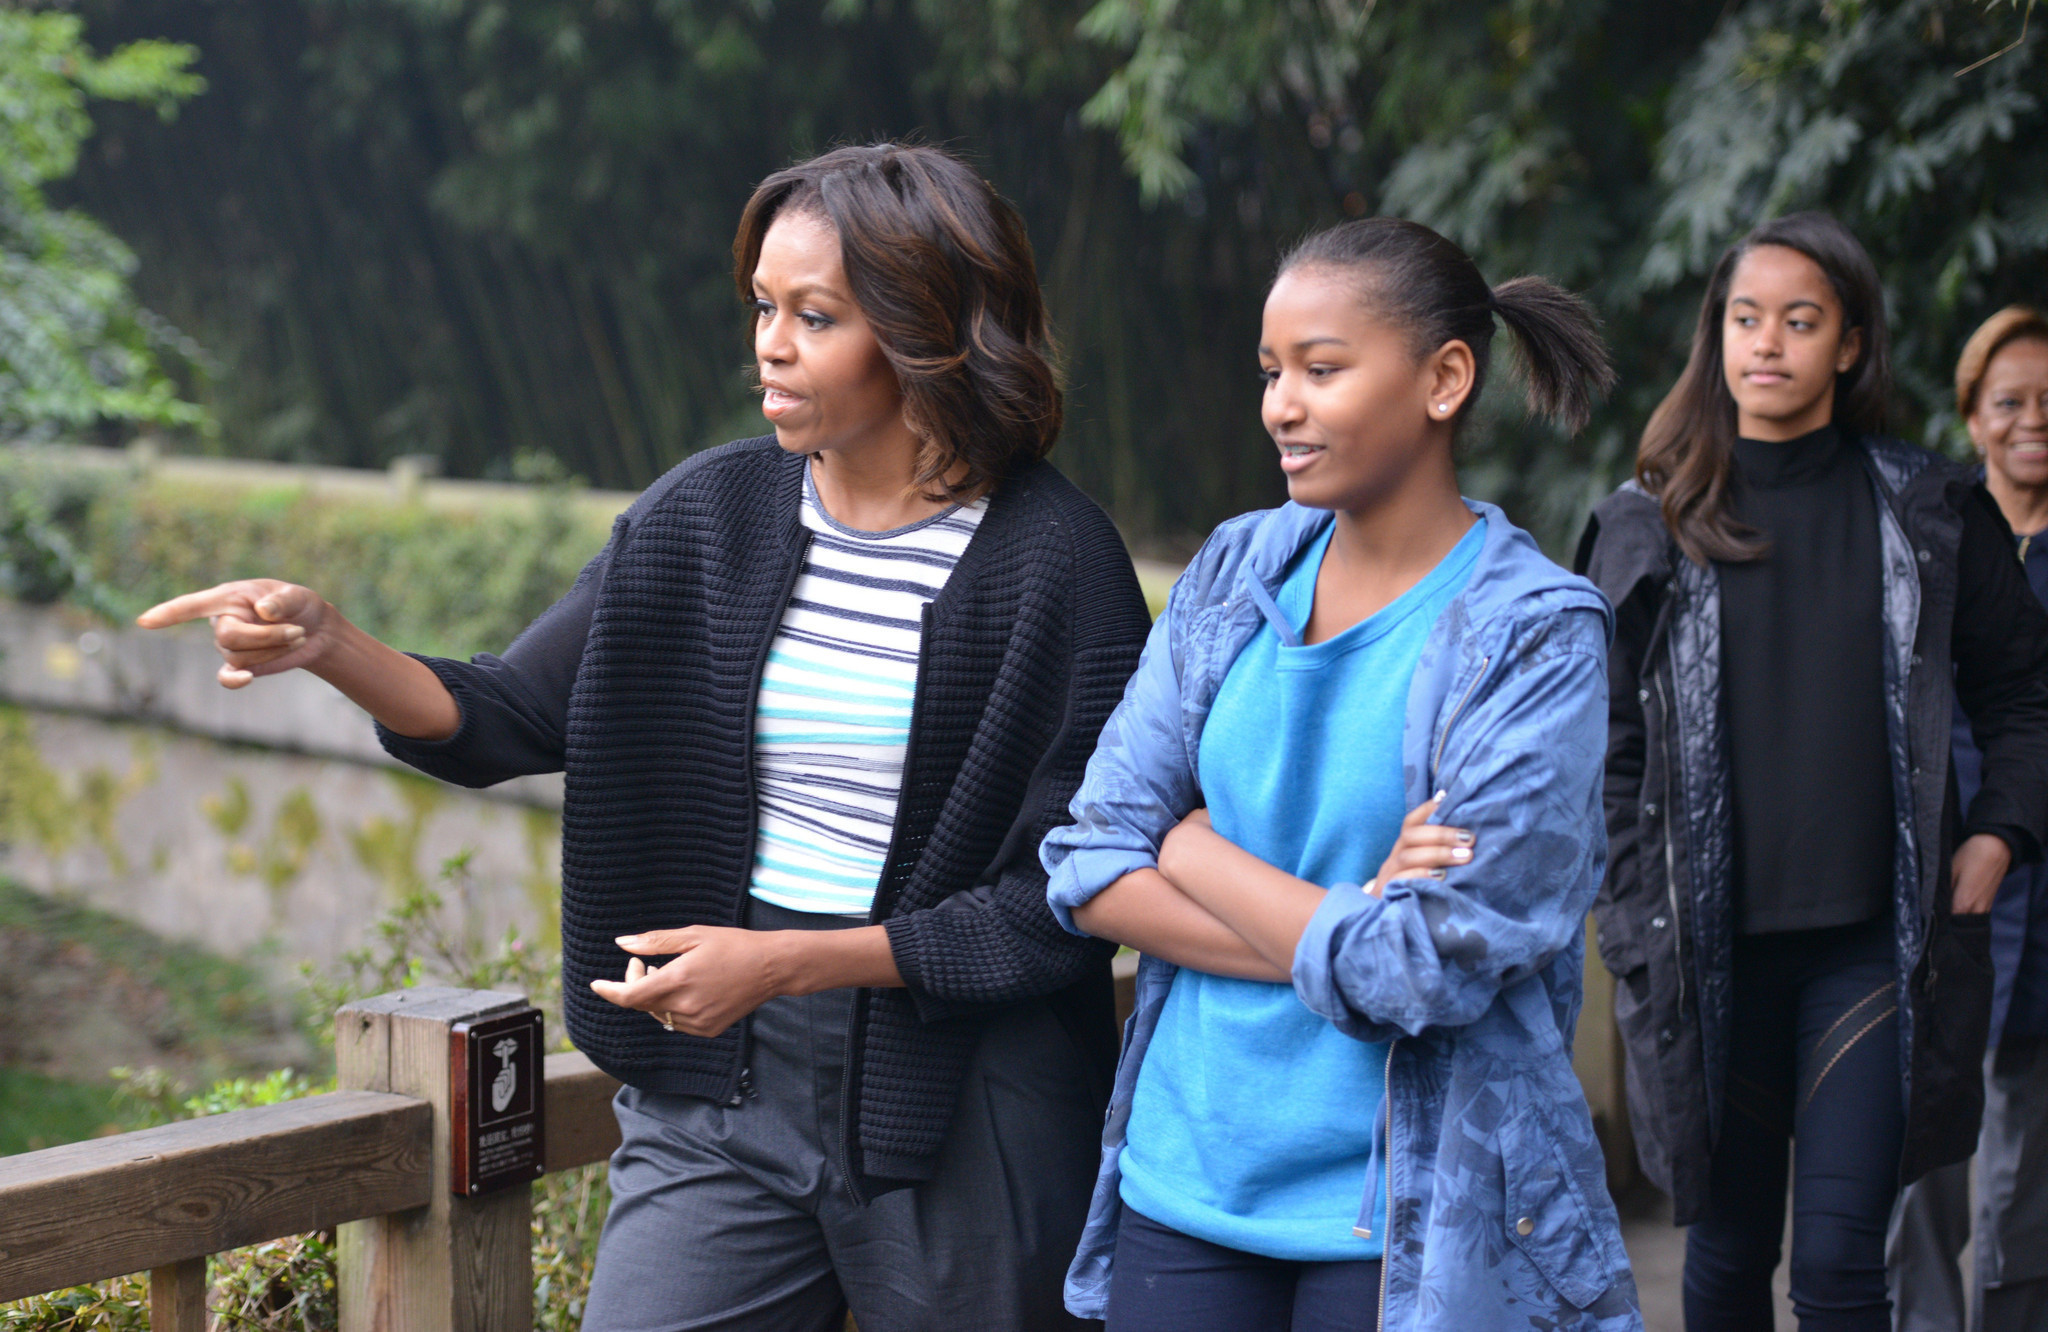 First lady Michelle Obama to travel Europe with mother, daughters - Chicago Tribune2048 x 1332